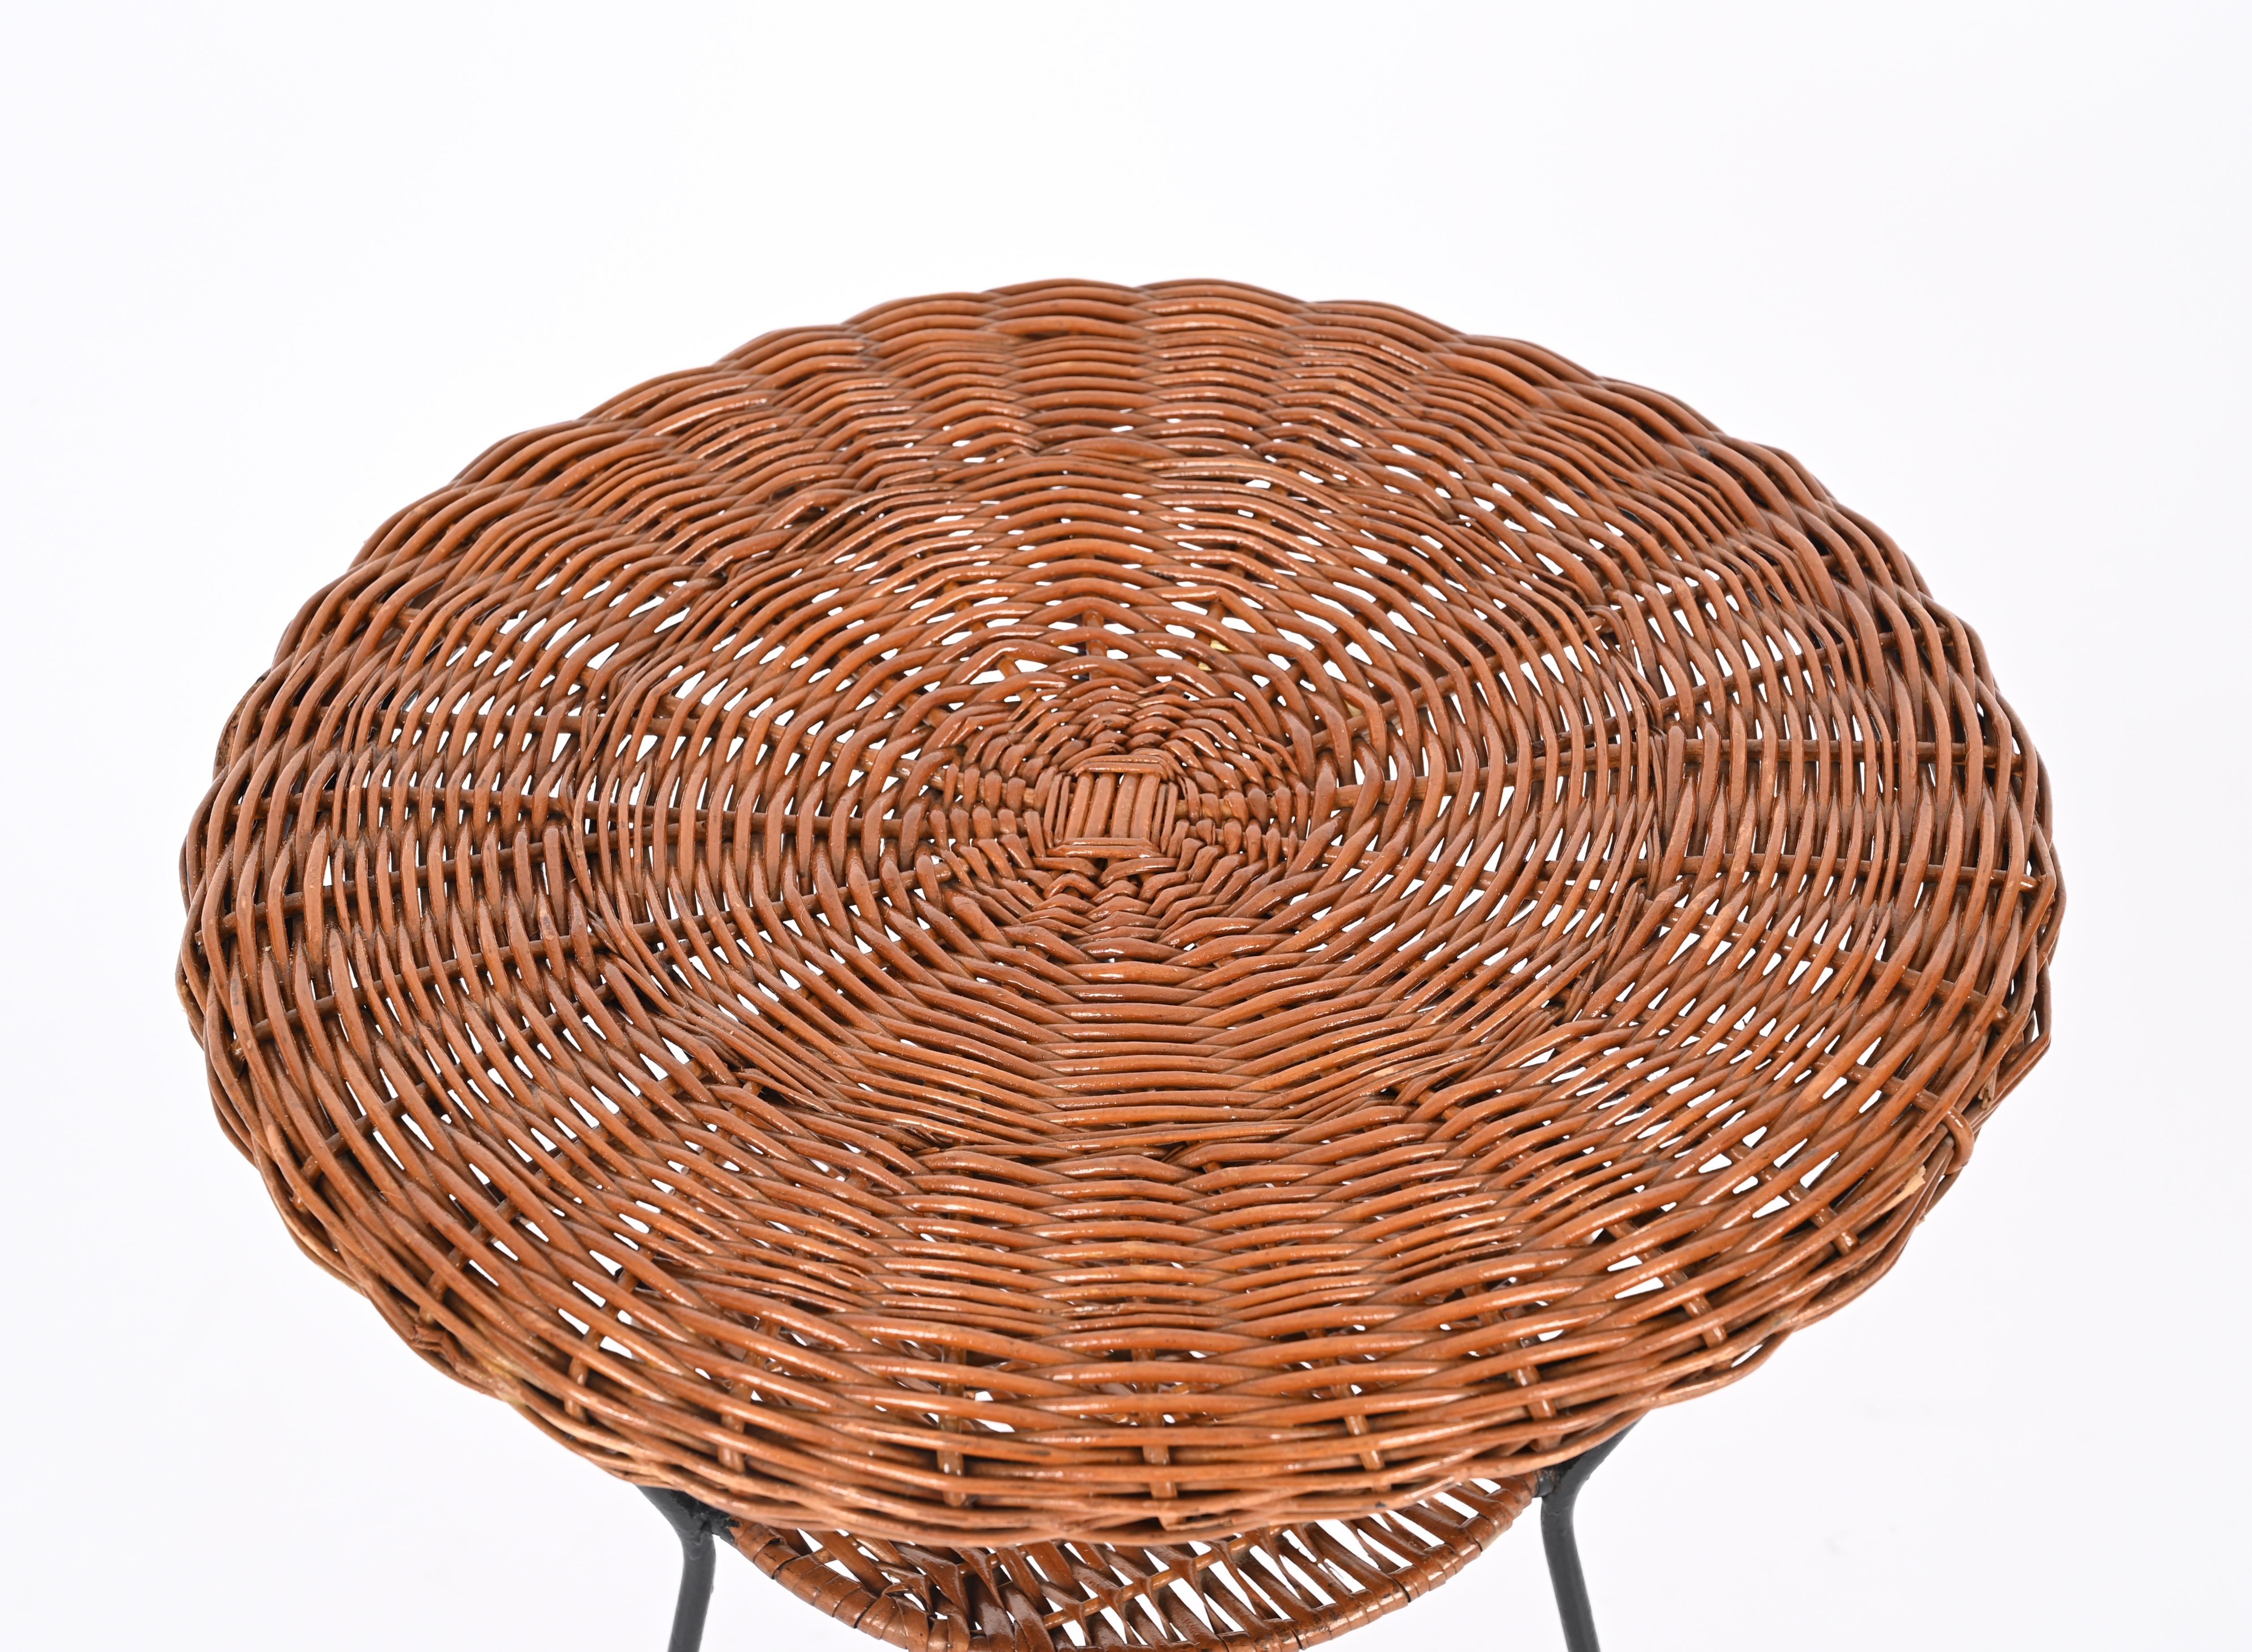 Woven Rattan, Wicker and Iron Two-Tier Round Coffee Table, Matégot, France 1960s For Sale 3